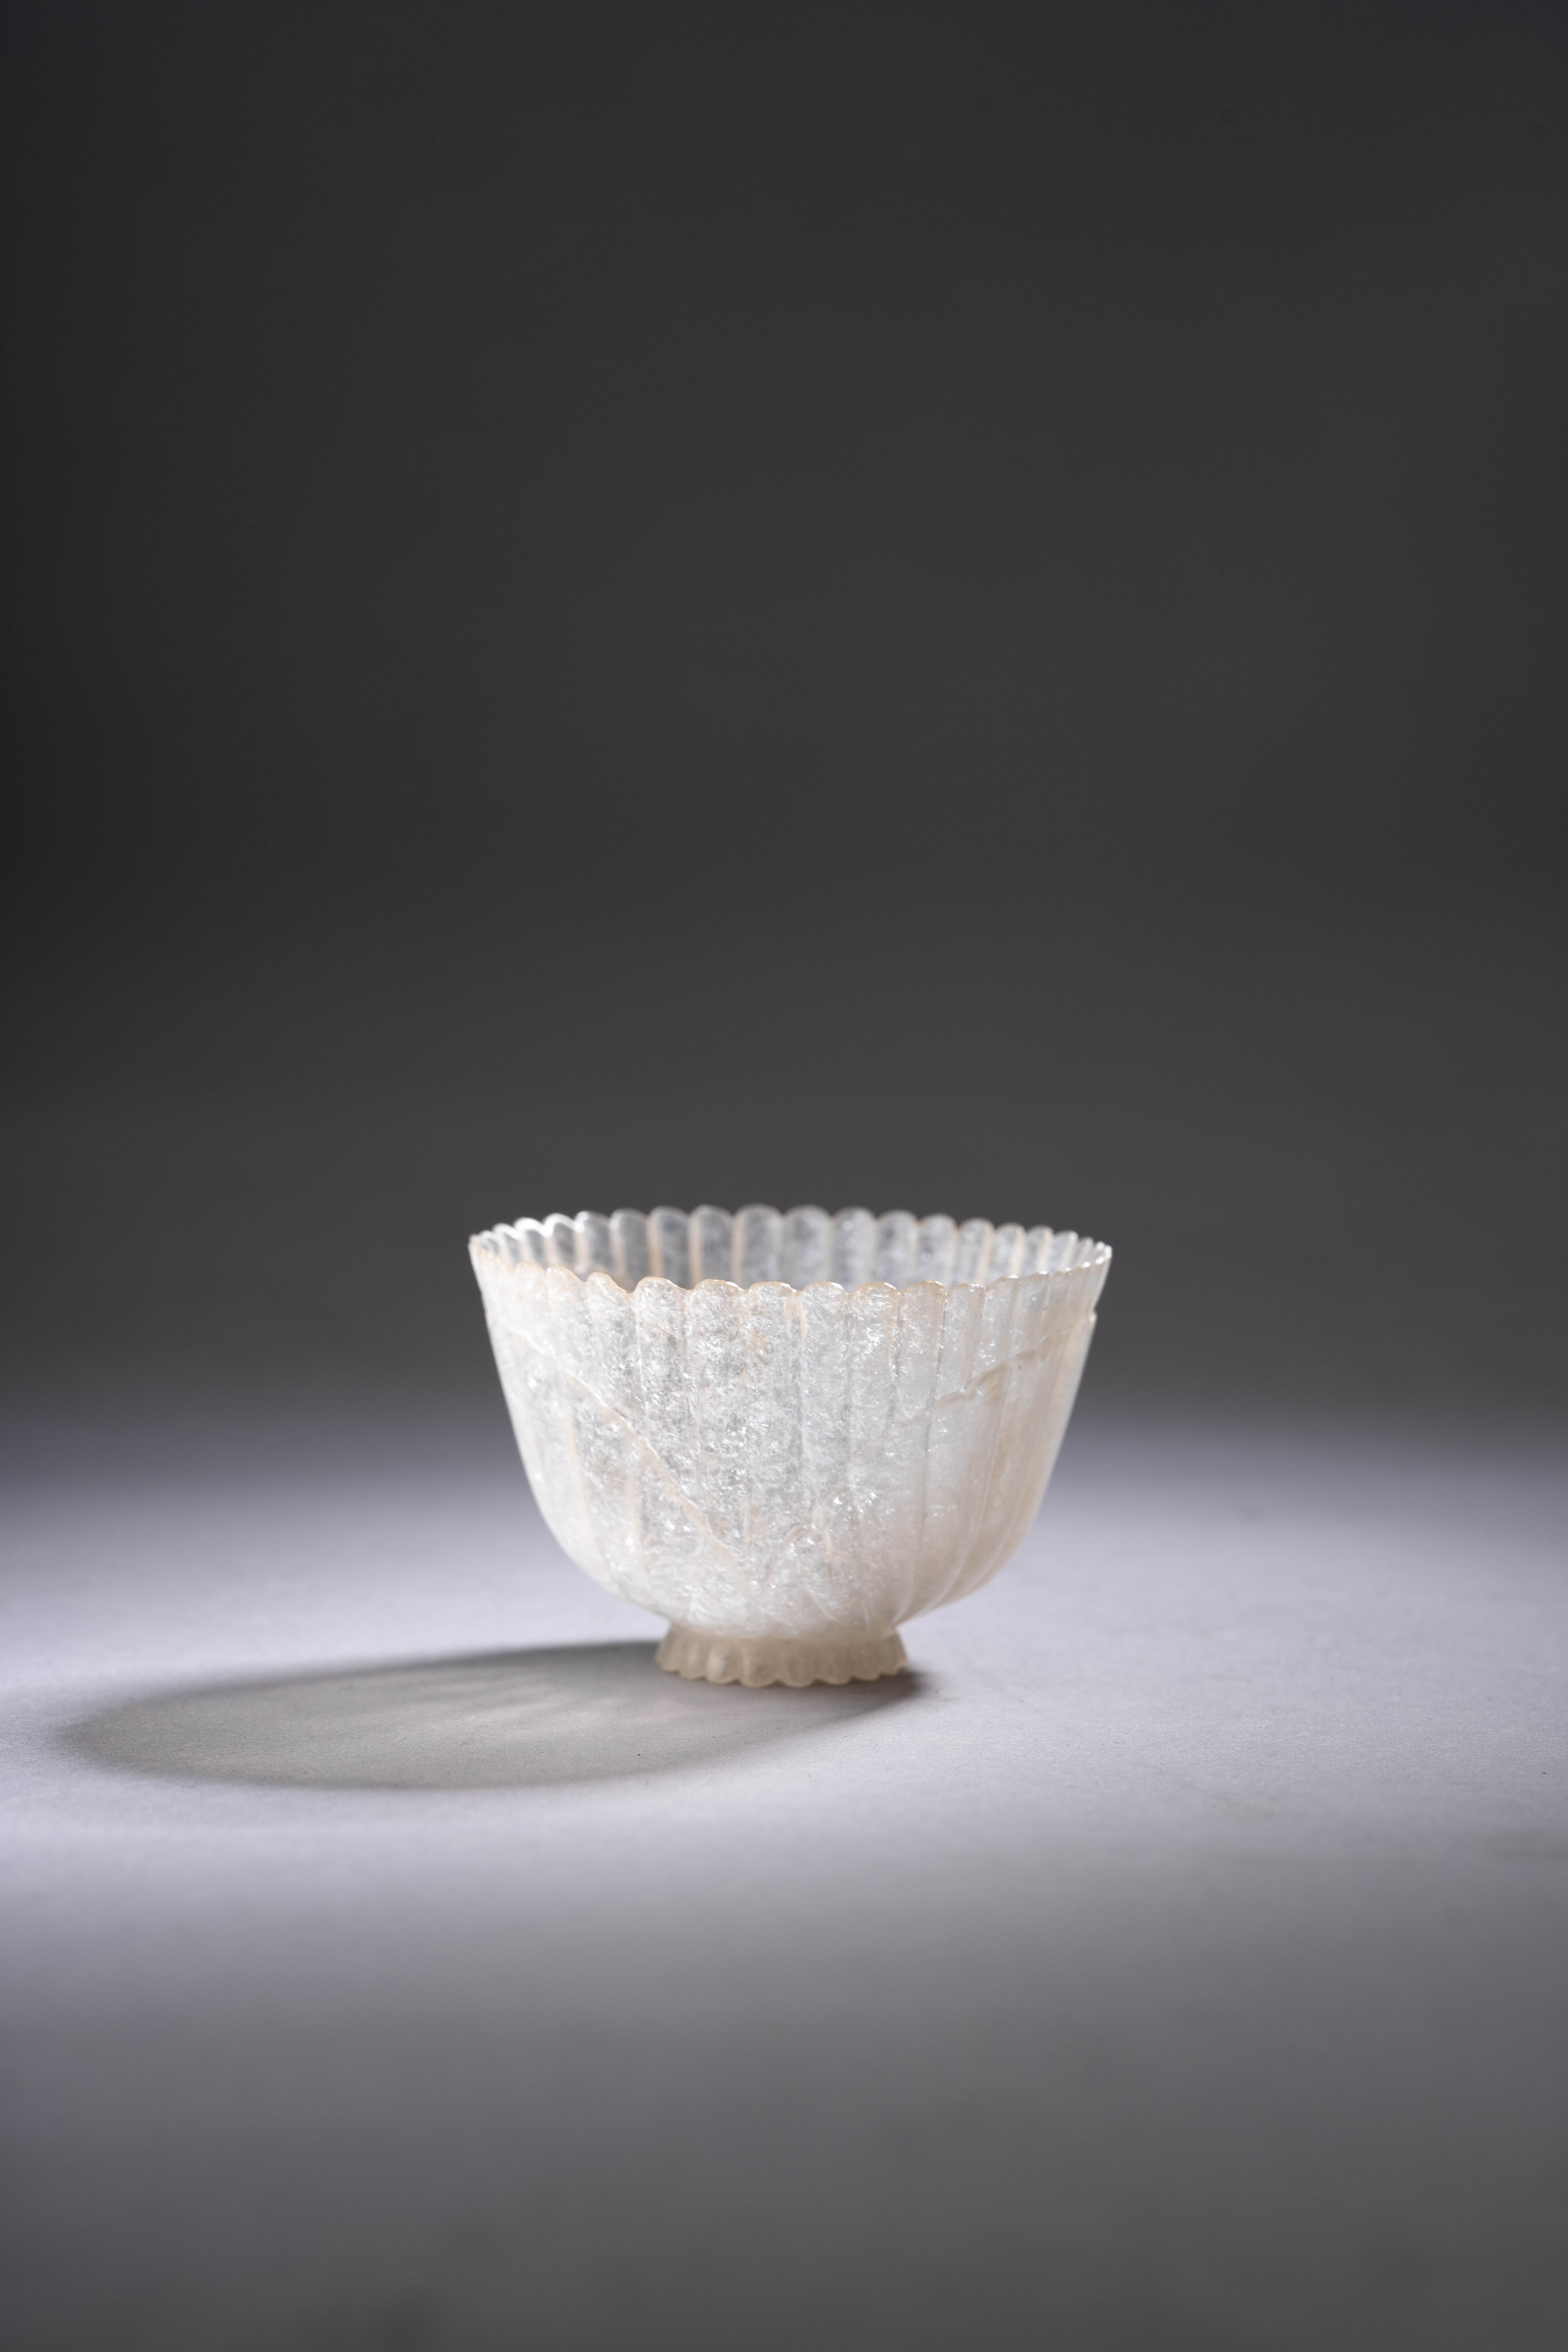 A RARE MINIATURE WHITE JADEITE MUGHAL-STYLE CUP 18TH/19TH CENTURY Finely carved as a chrysanthemum